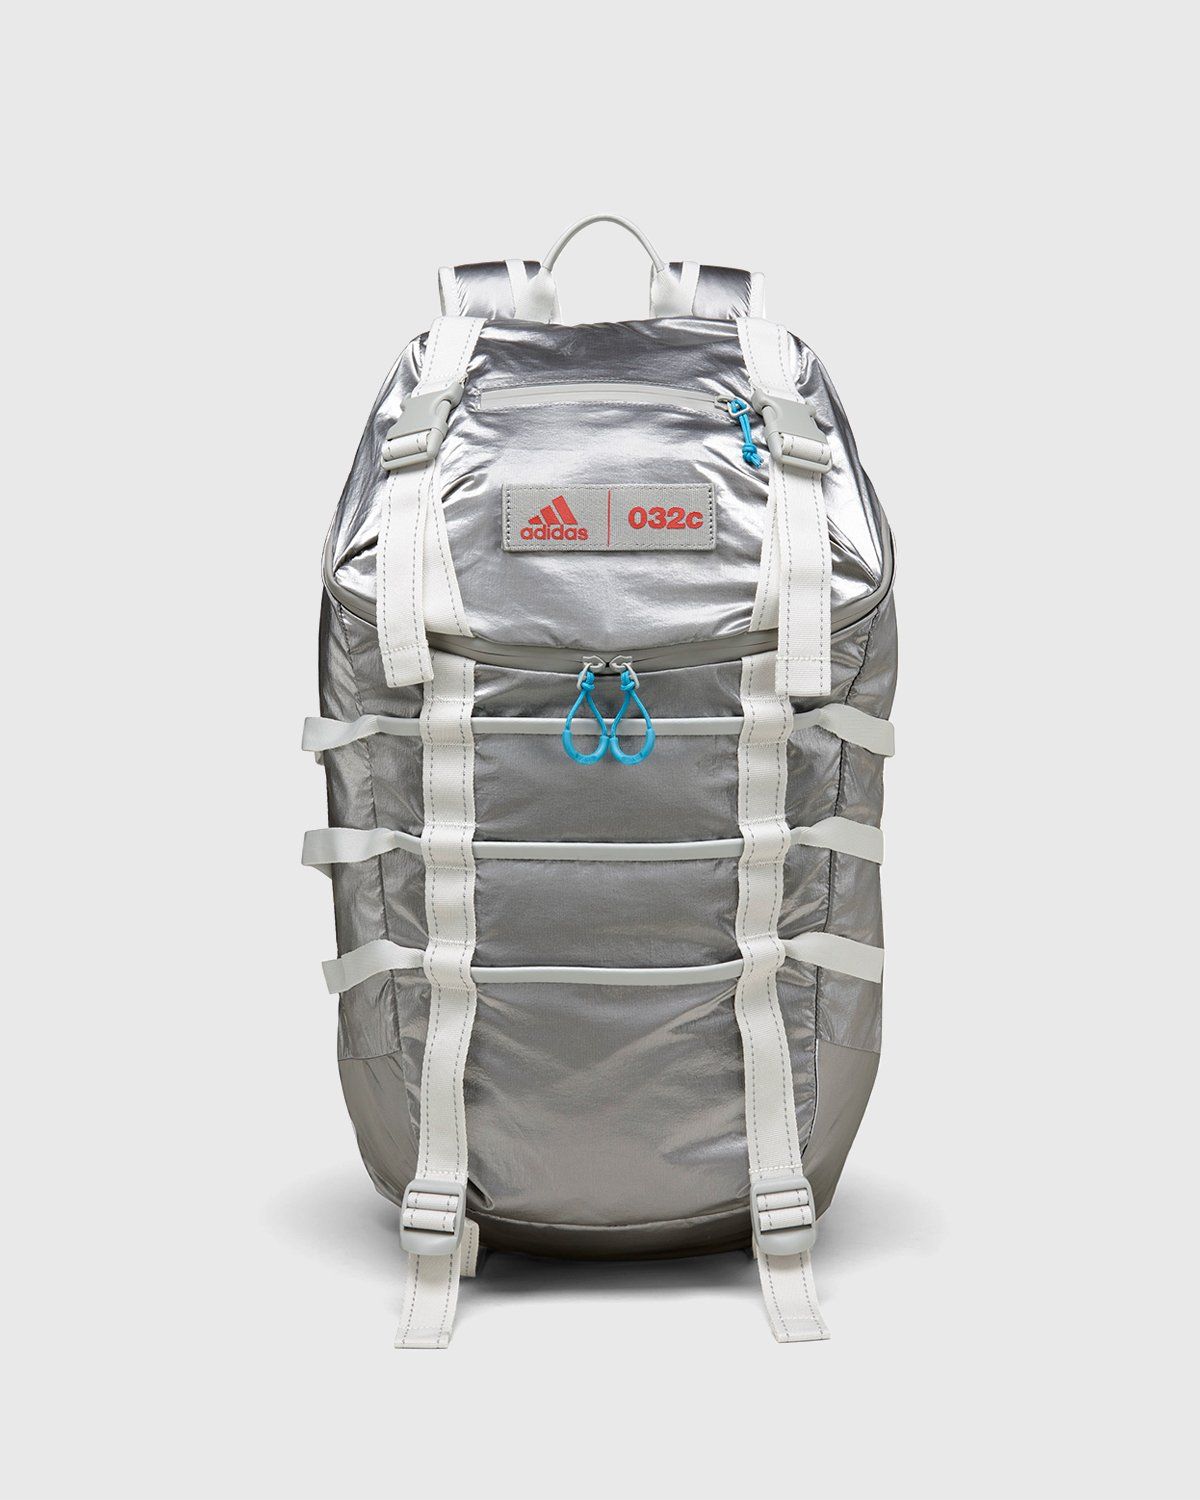 Adidas x 032c – Backpack Greone - Bags - White - Image 1